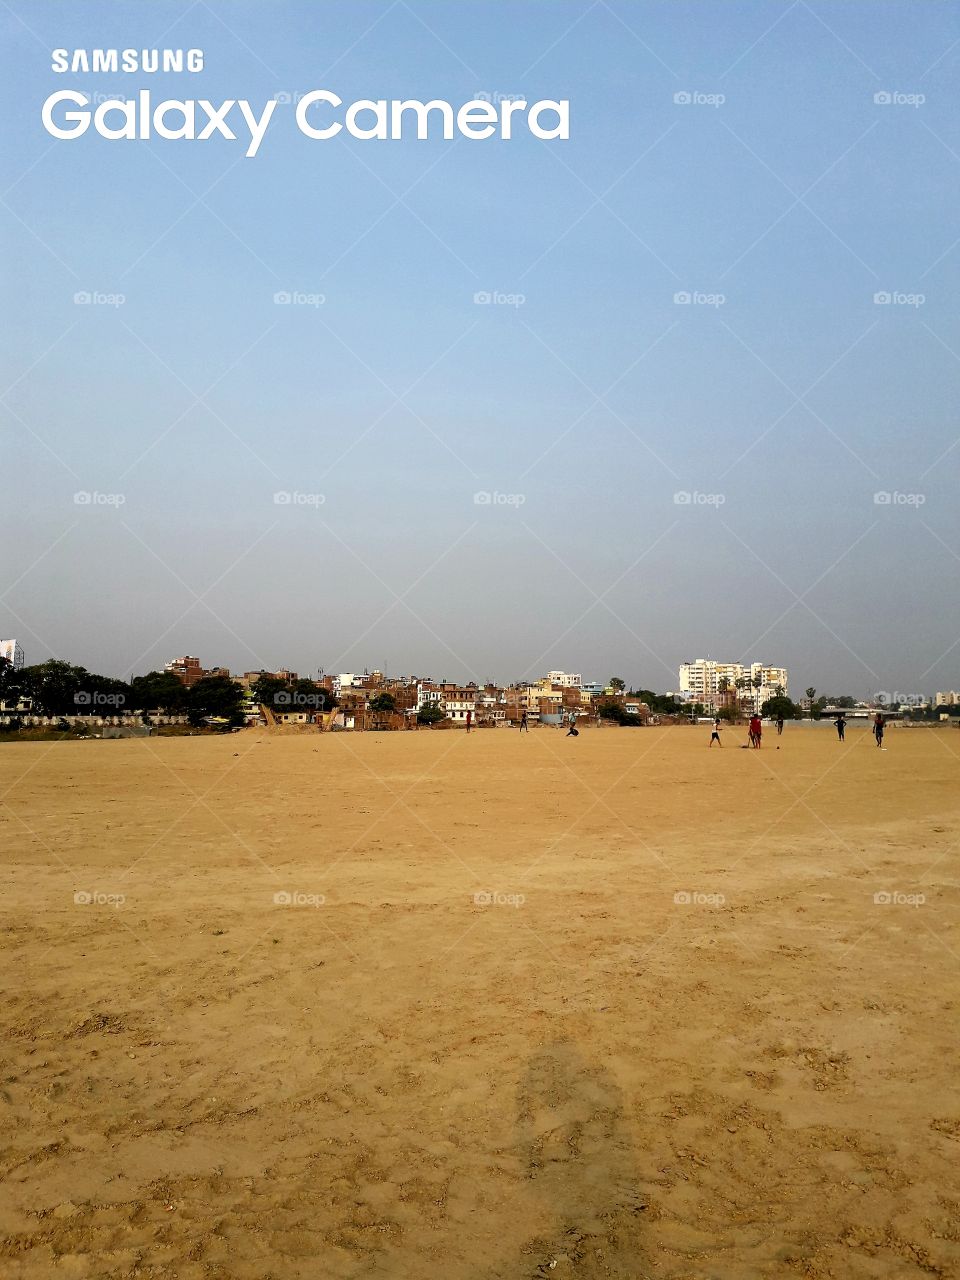 Playing cricket and landscape